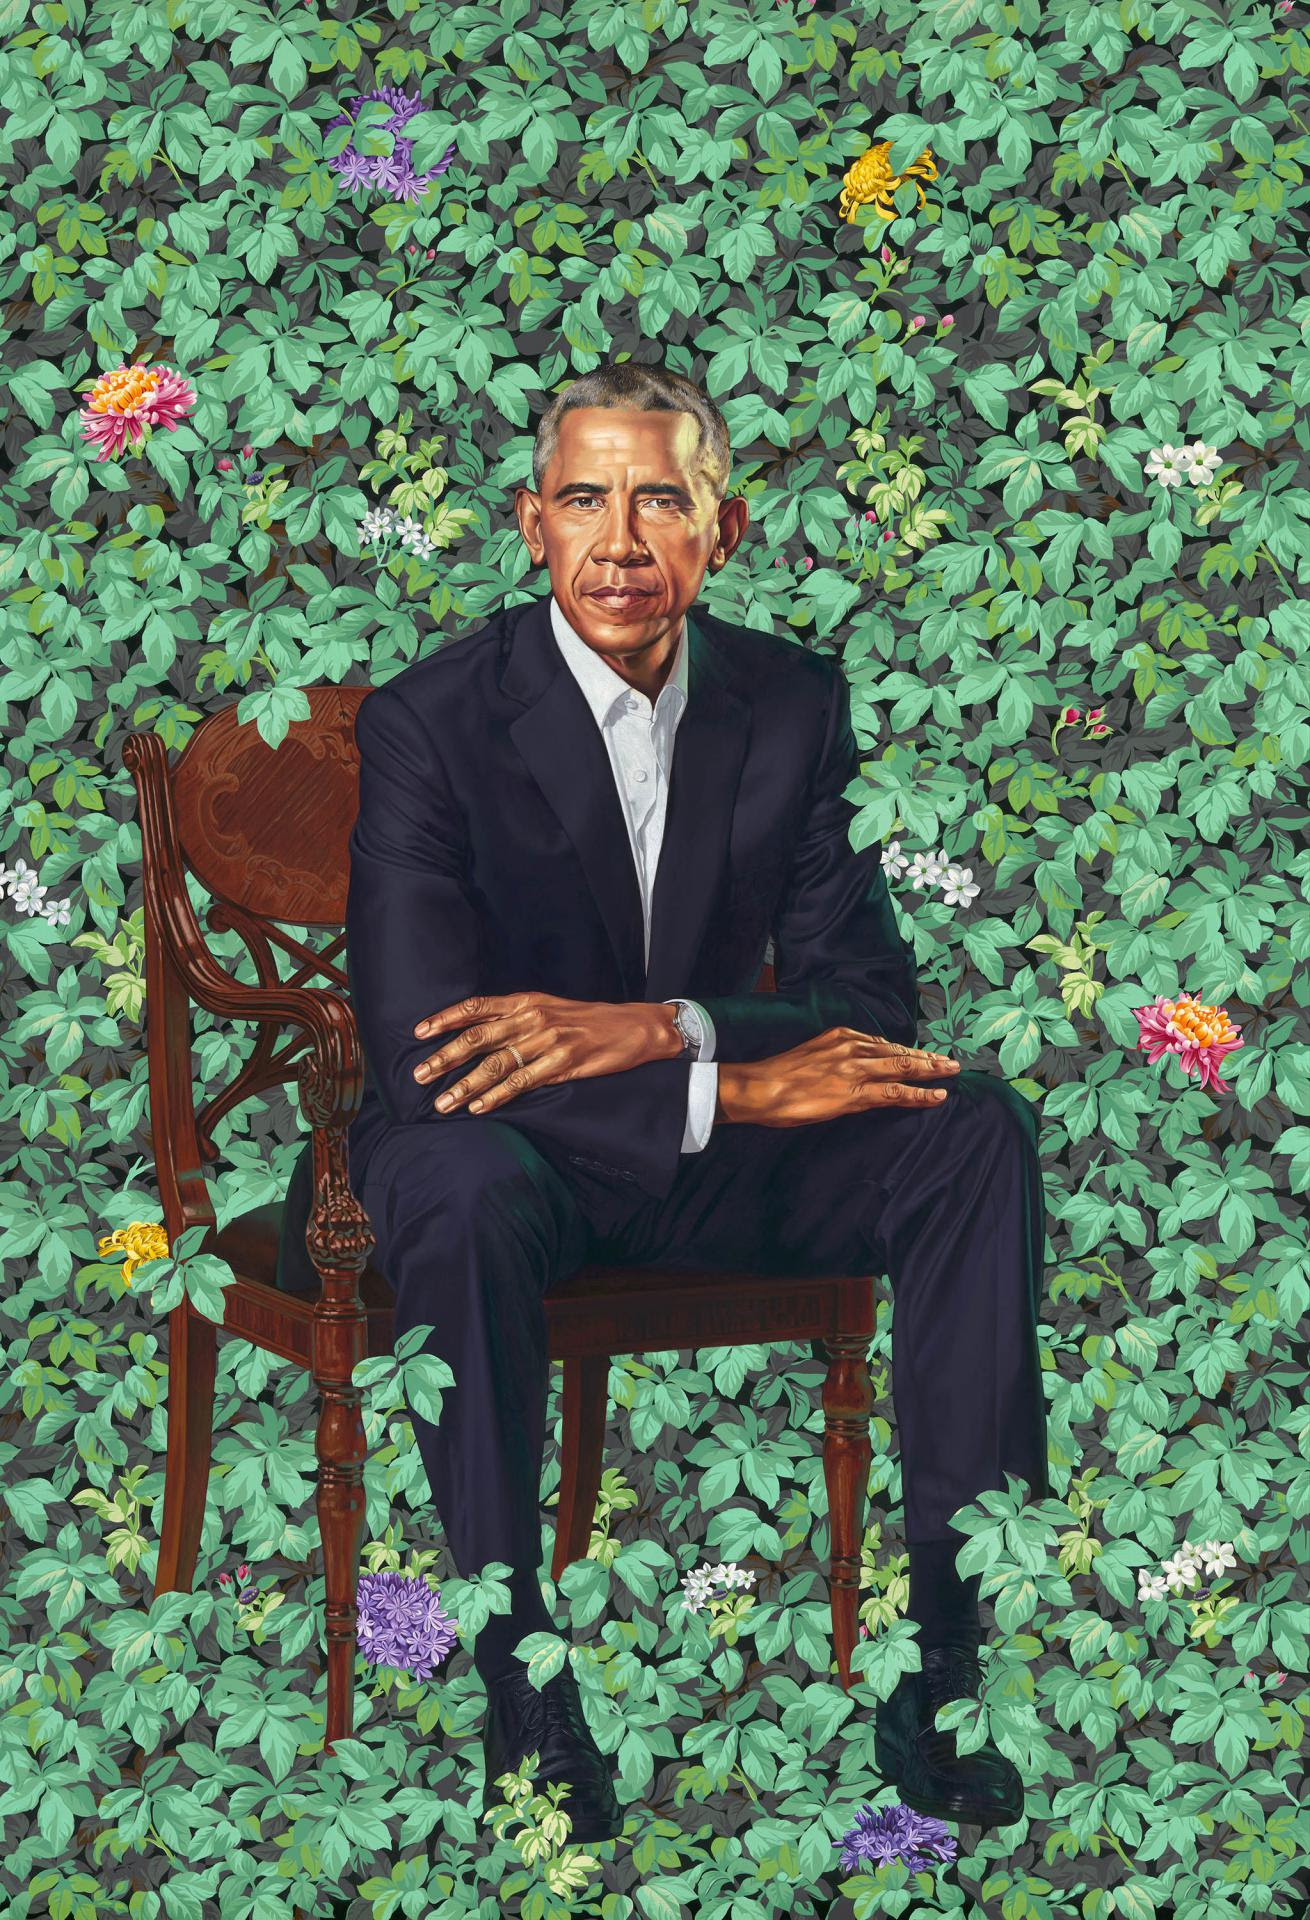 Kehinde Wiley | Portrait Barack Obama | Kehinde Wiley’s portrait of former president Barack Obama for the Smithsonian’s National Portrait Gallery.
| 1